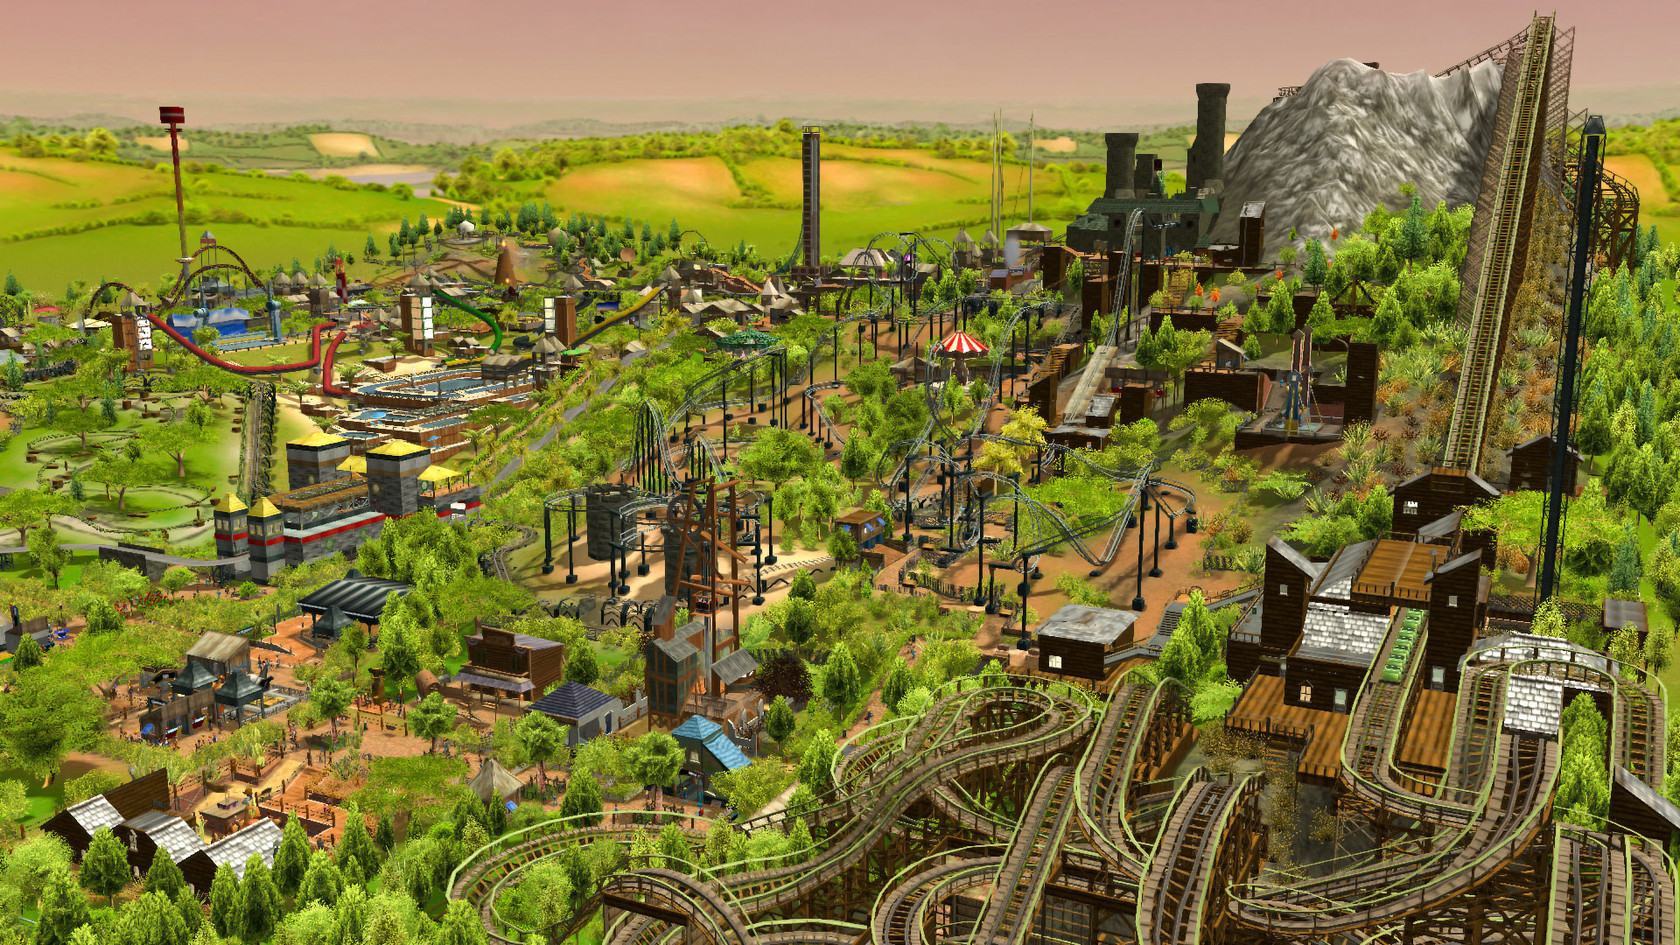 RollerCoaster Tycoon 3 - IGN